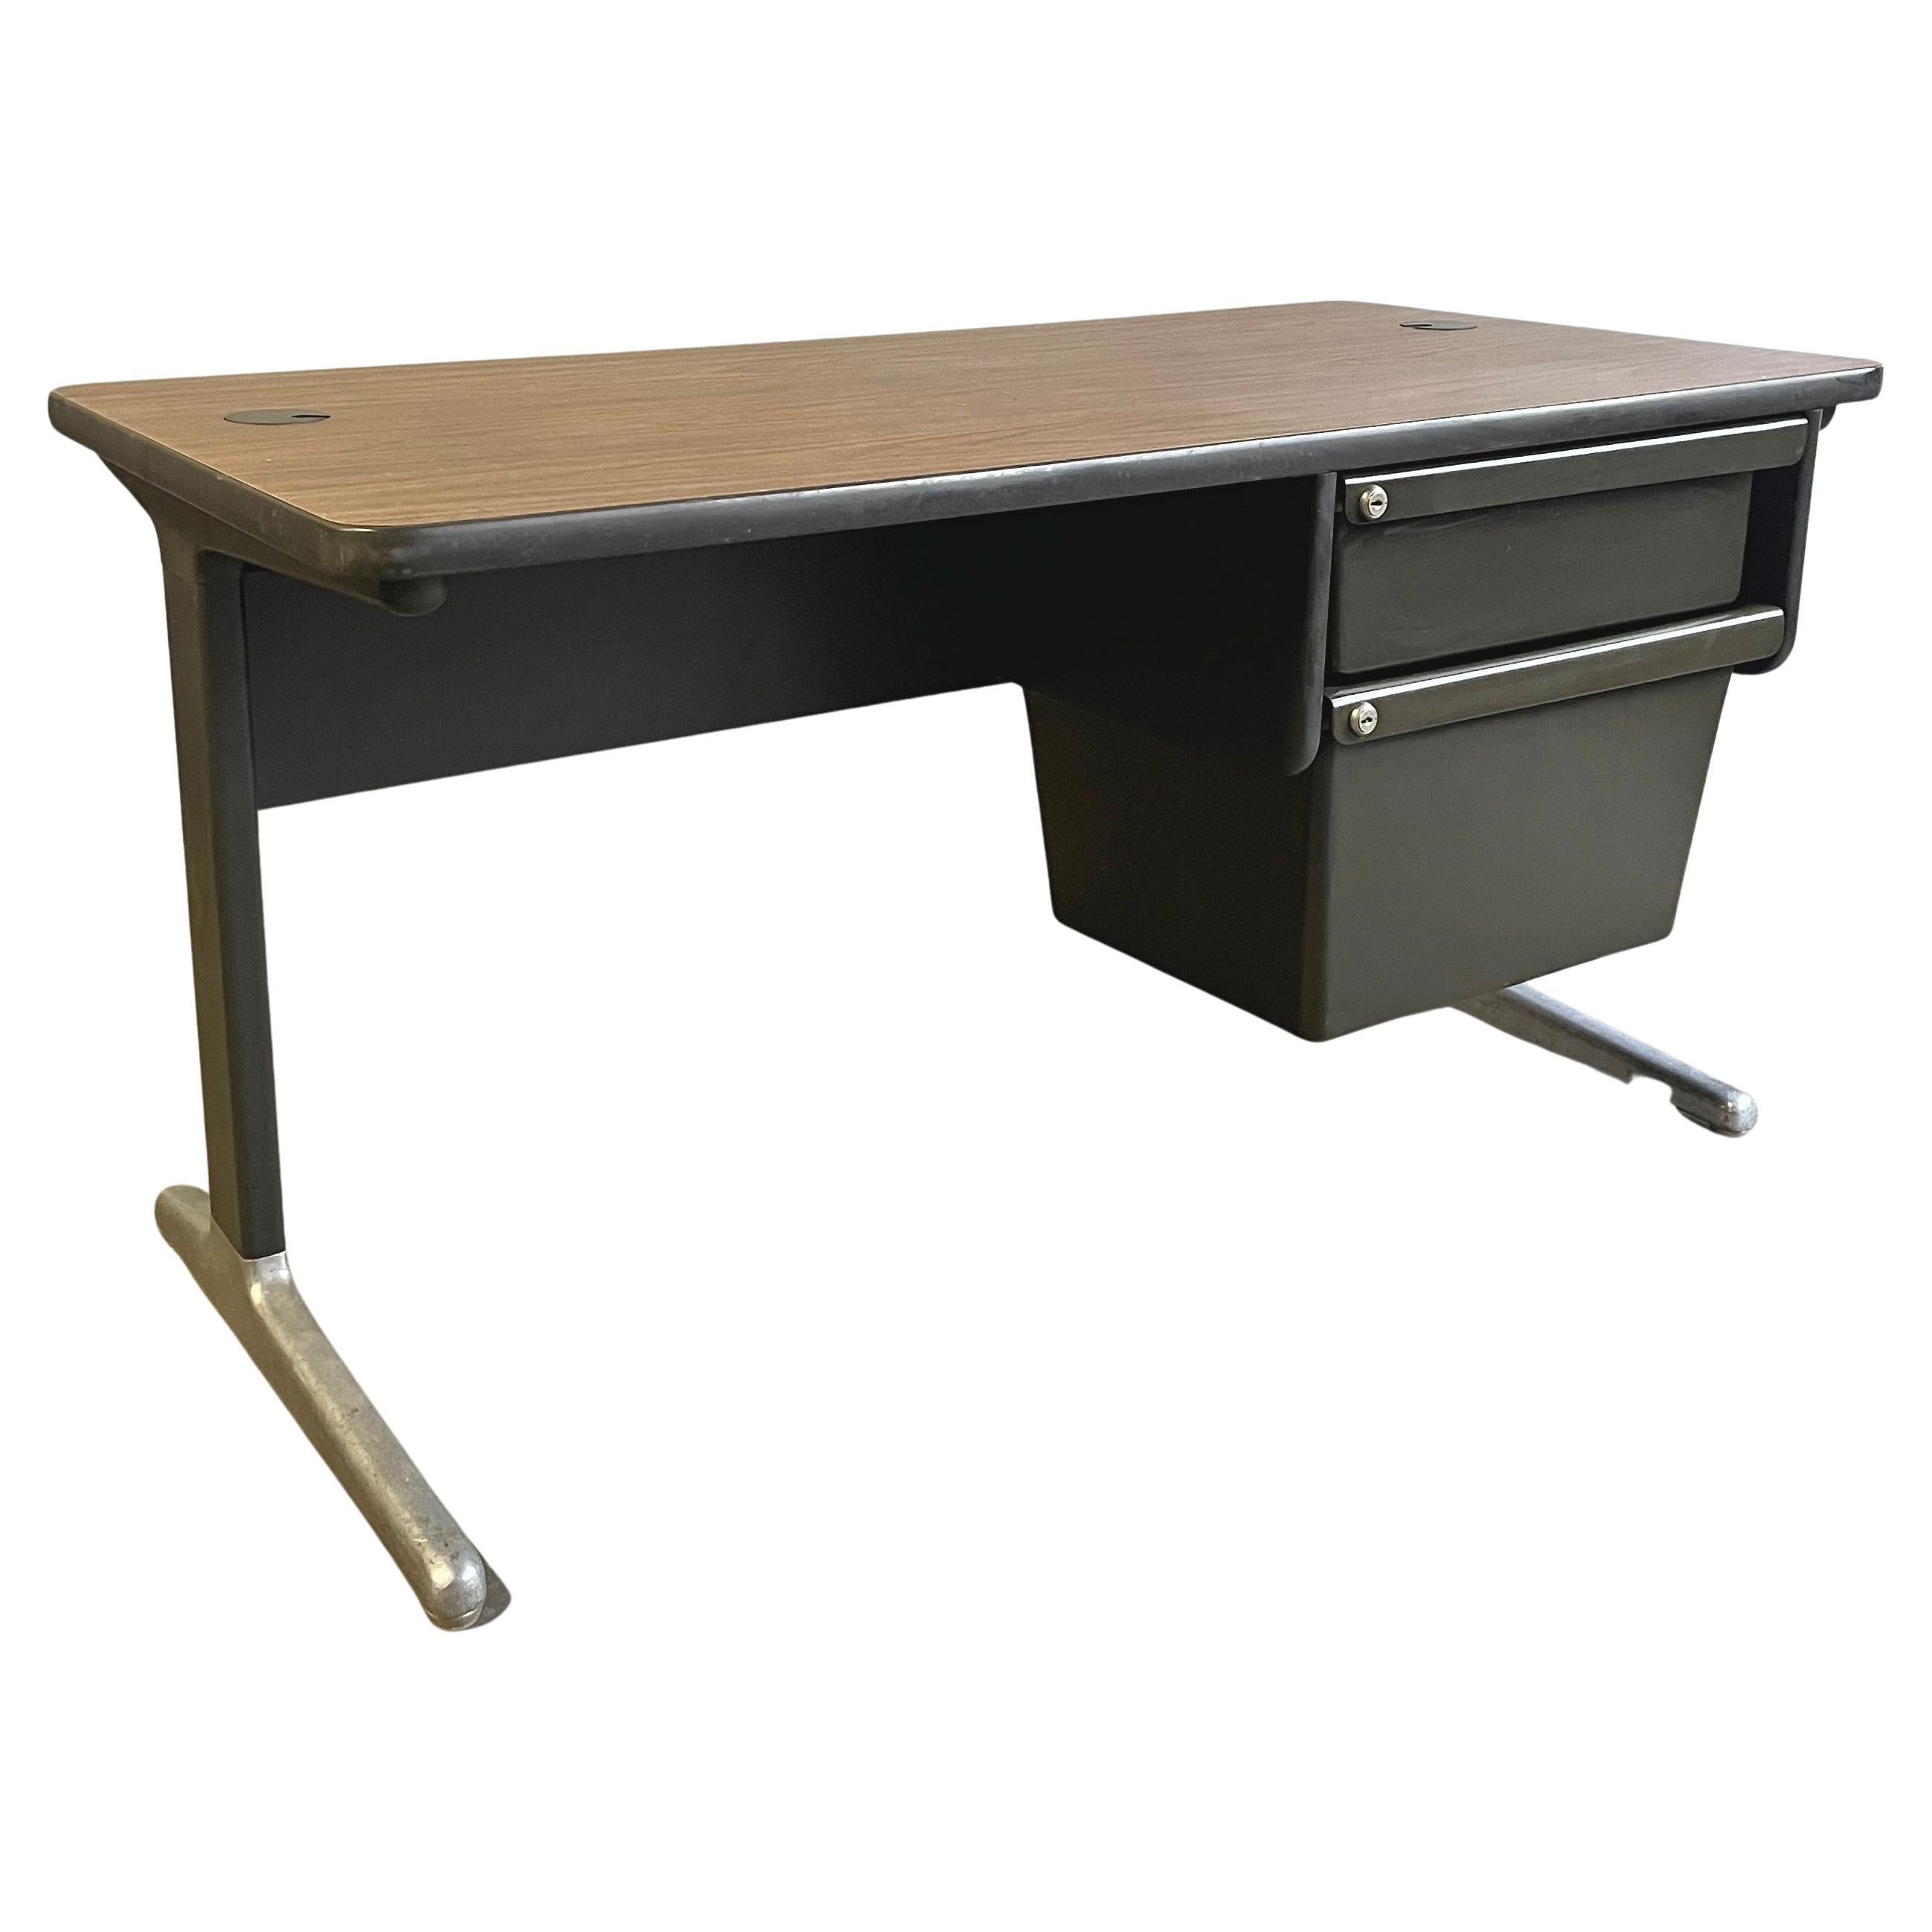 Nice vintage George Nelson petite desk or return. Great apt size desk or addition to your mcm office!
Part of the action office series for Herman Miller.

Laminate walnut top, supported by steel and aluminum legs. Drawers are of hard plastic.